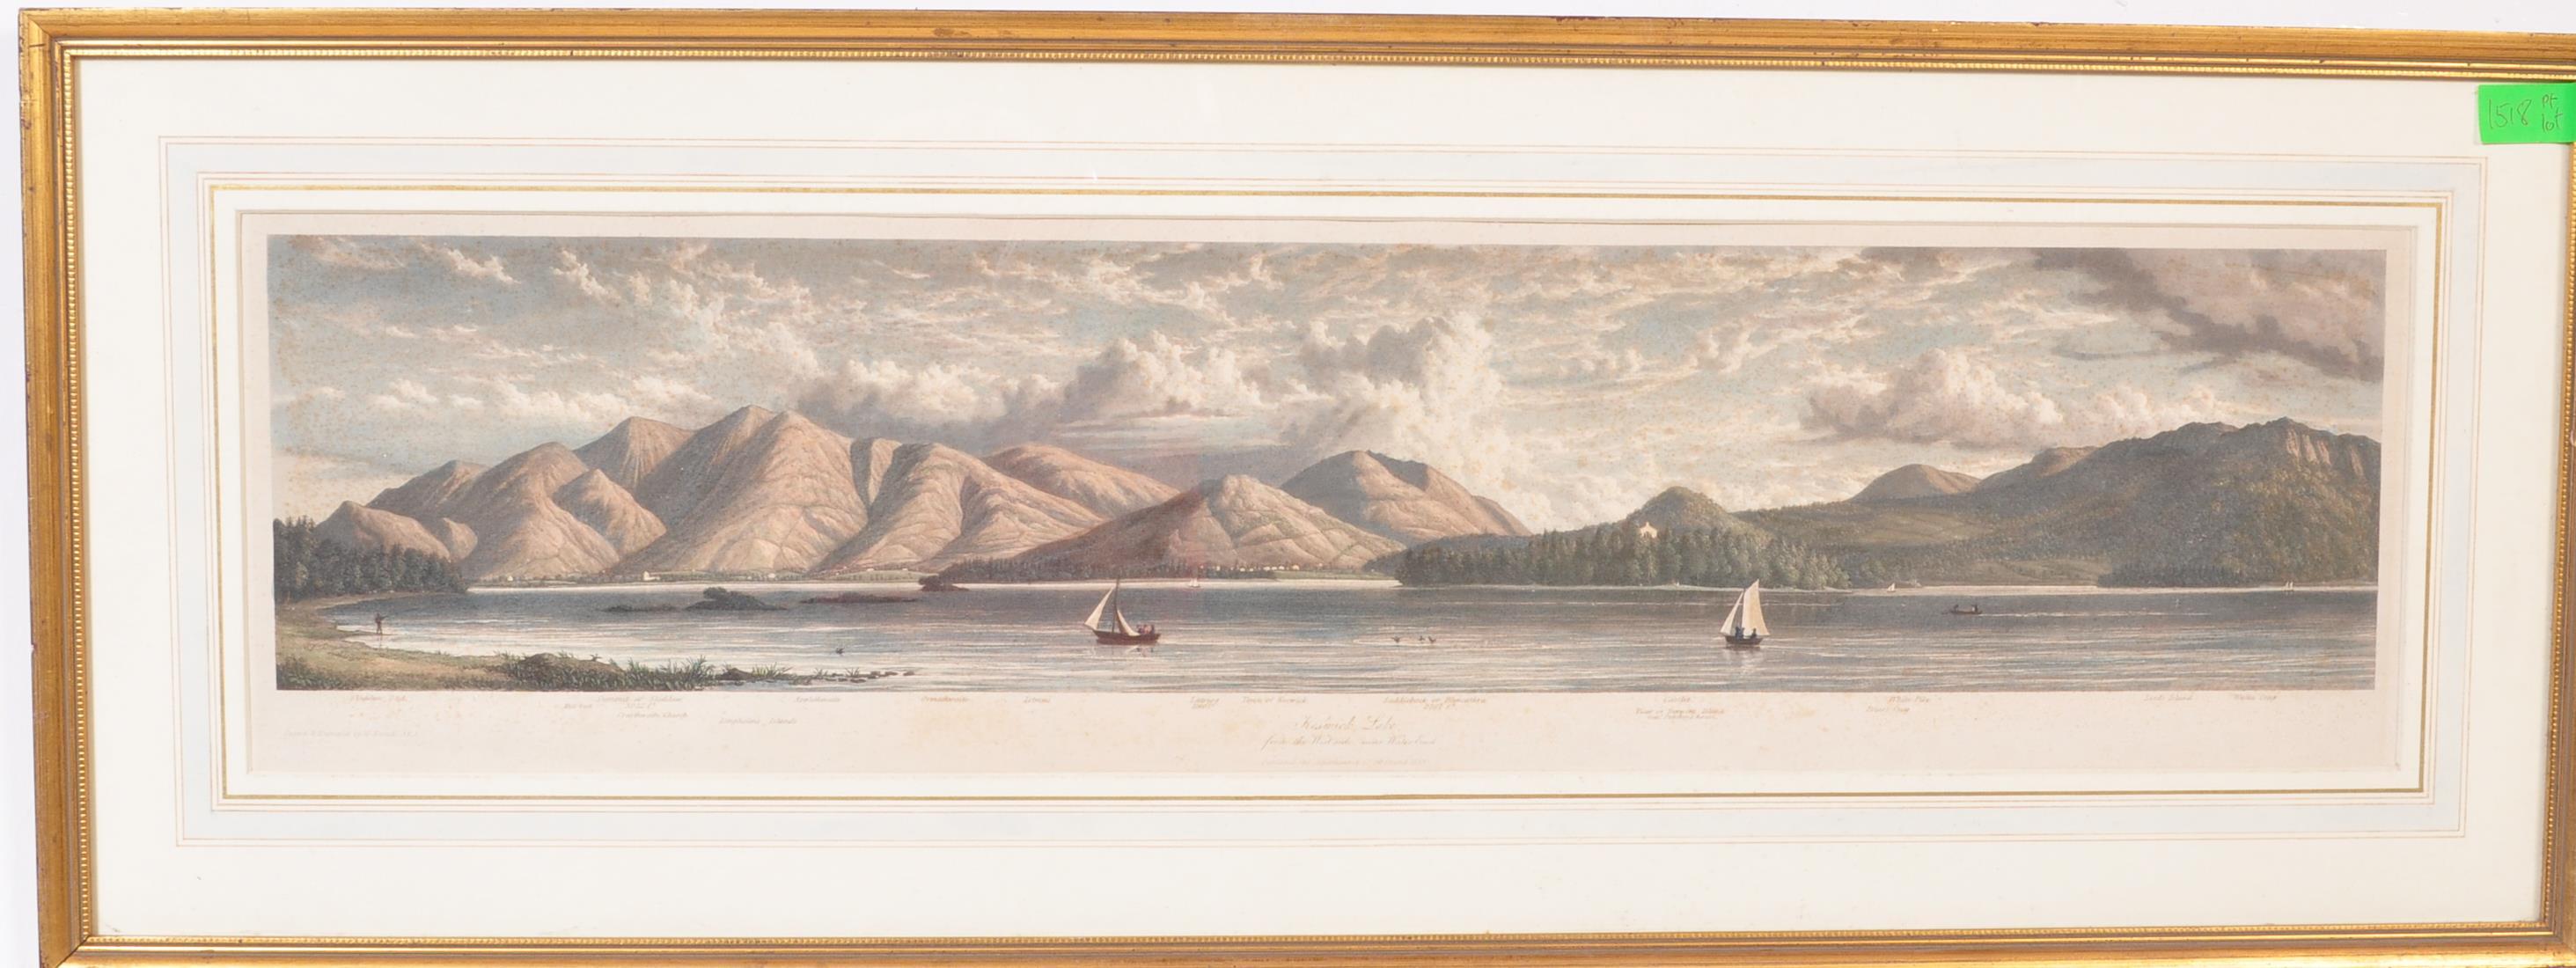 W WESTALL THREE 19TH CENTURY COLOUR ENGRAVINGS OF LAKE DISTRICT - Image 9 of 11